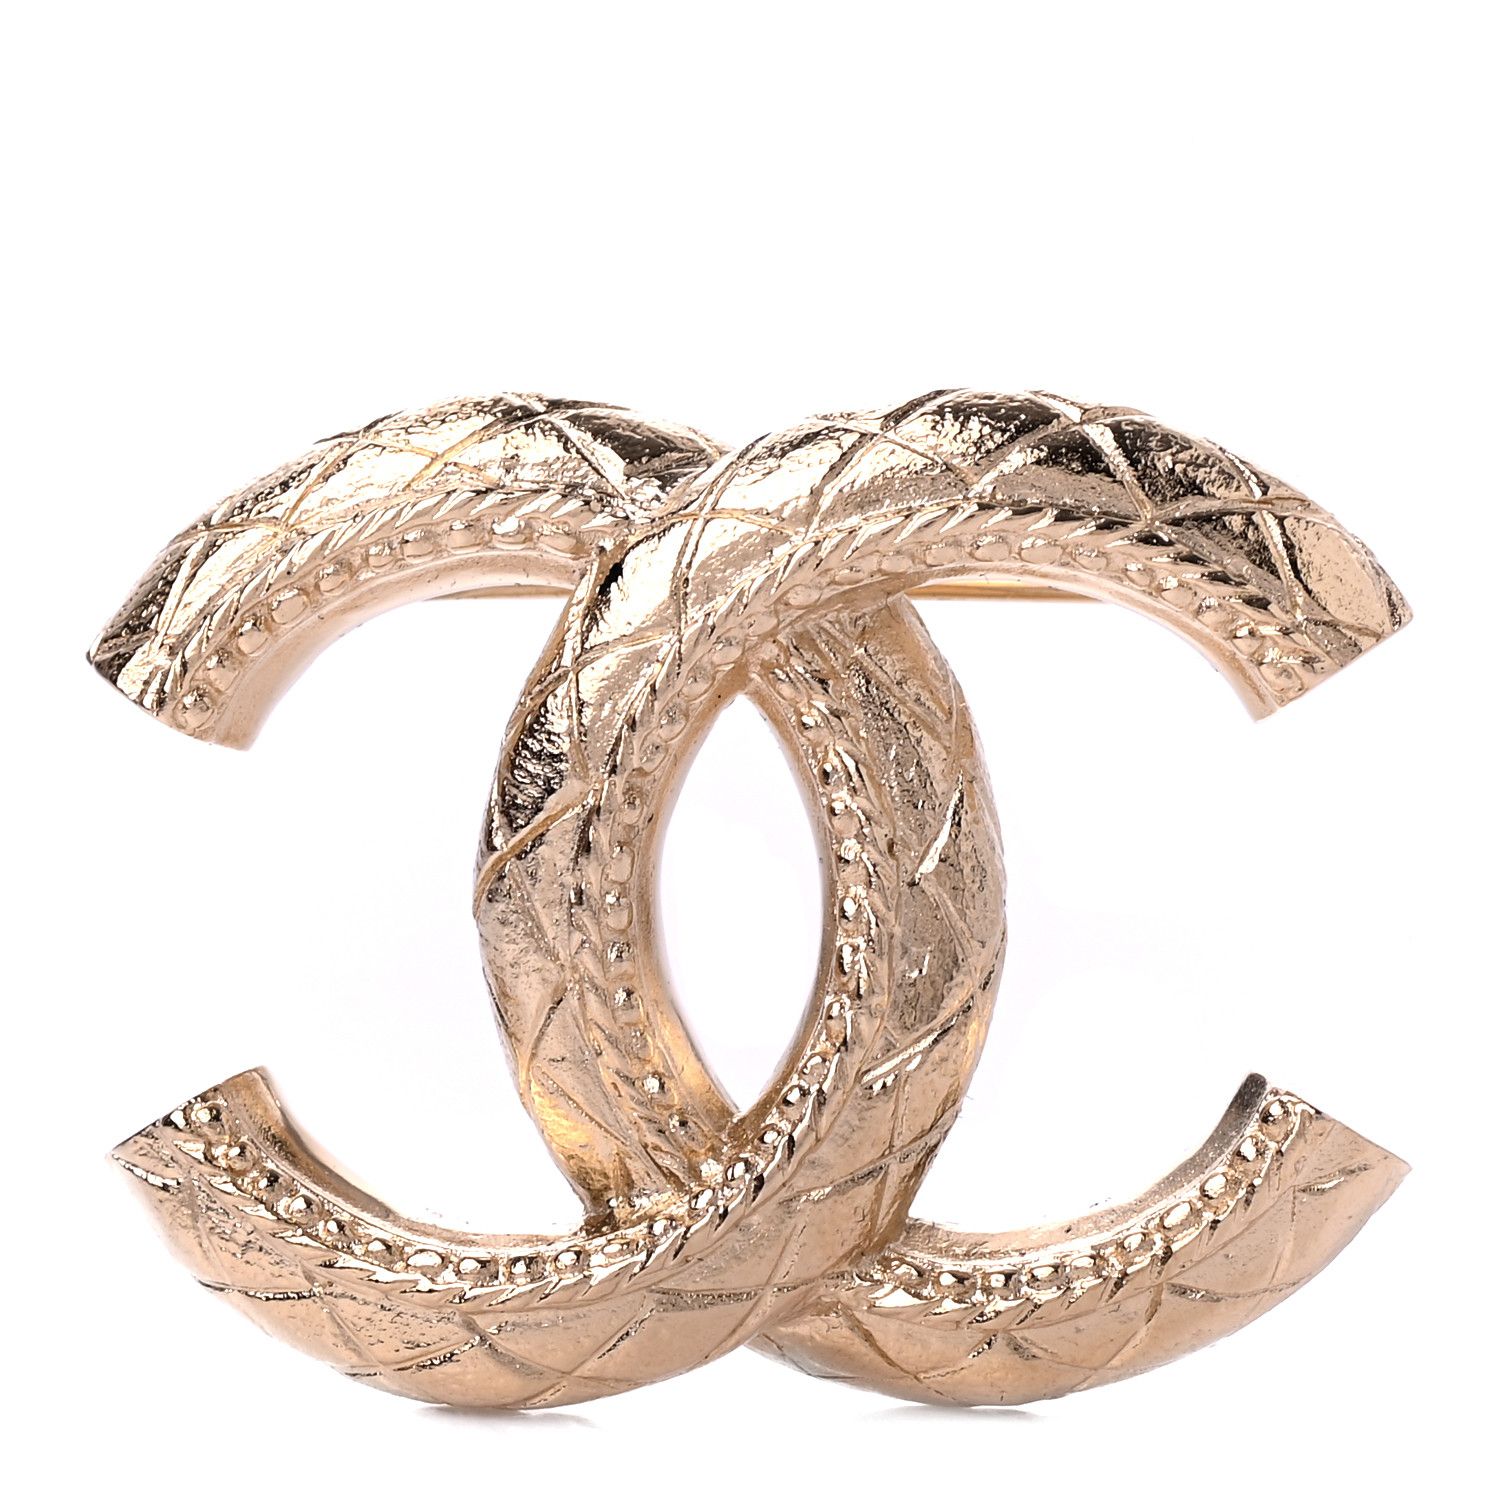 CHANEL

Metal CC Quilted Brooch Light Gold | Fashionphile